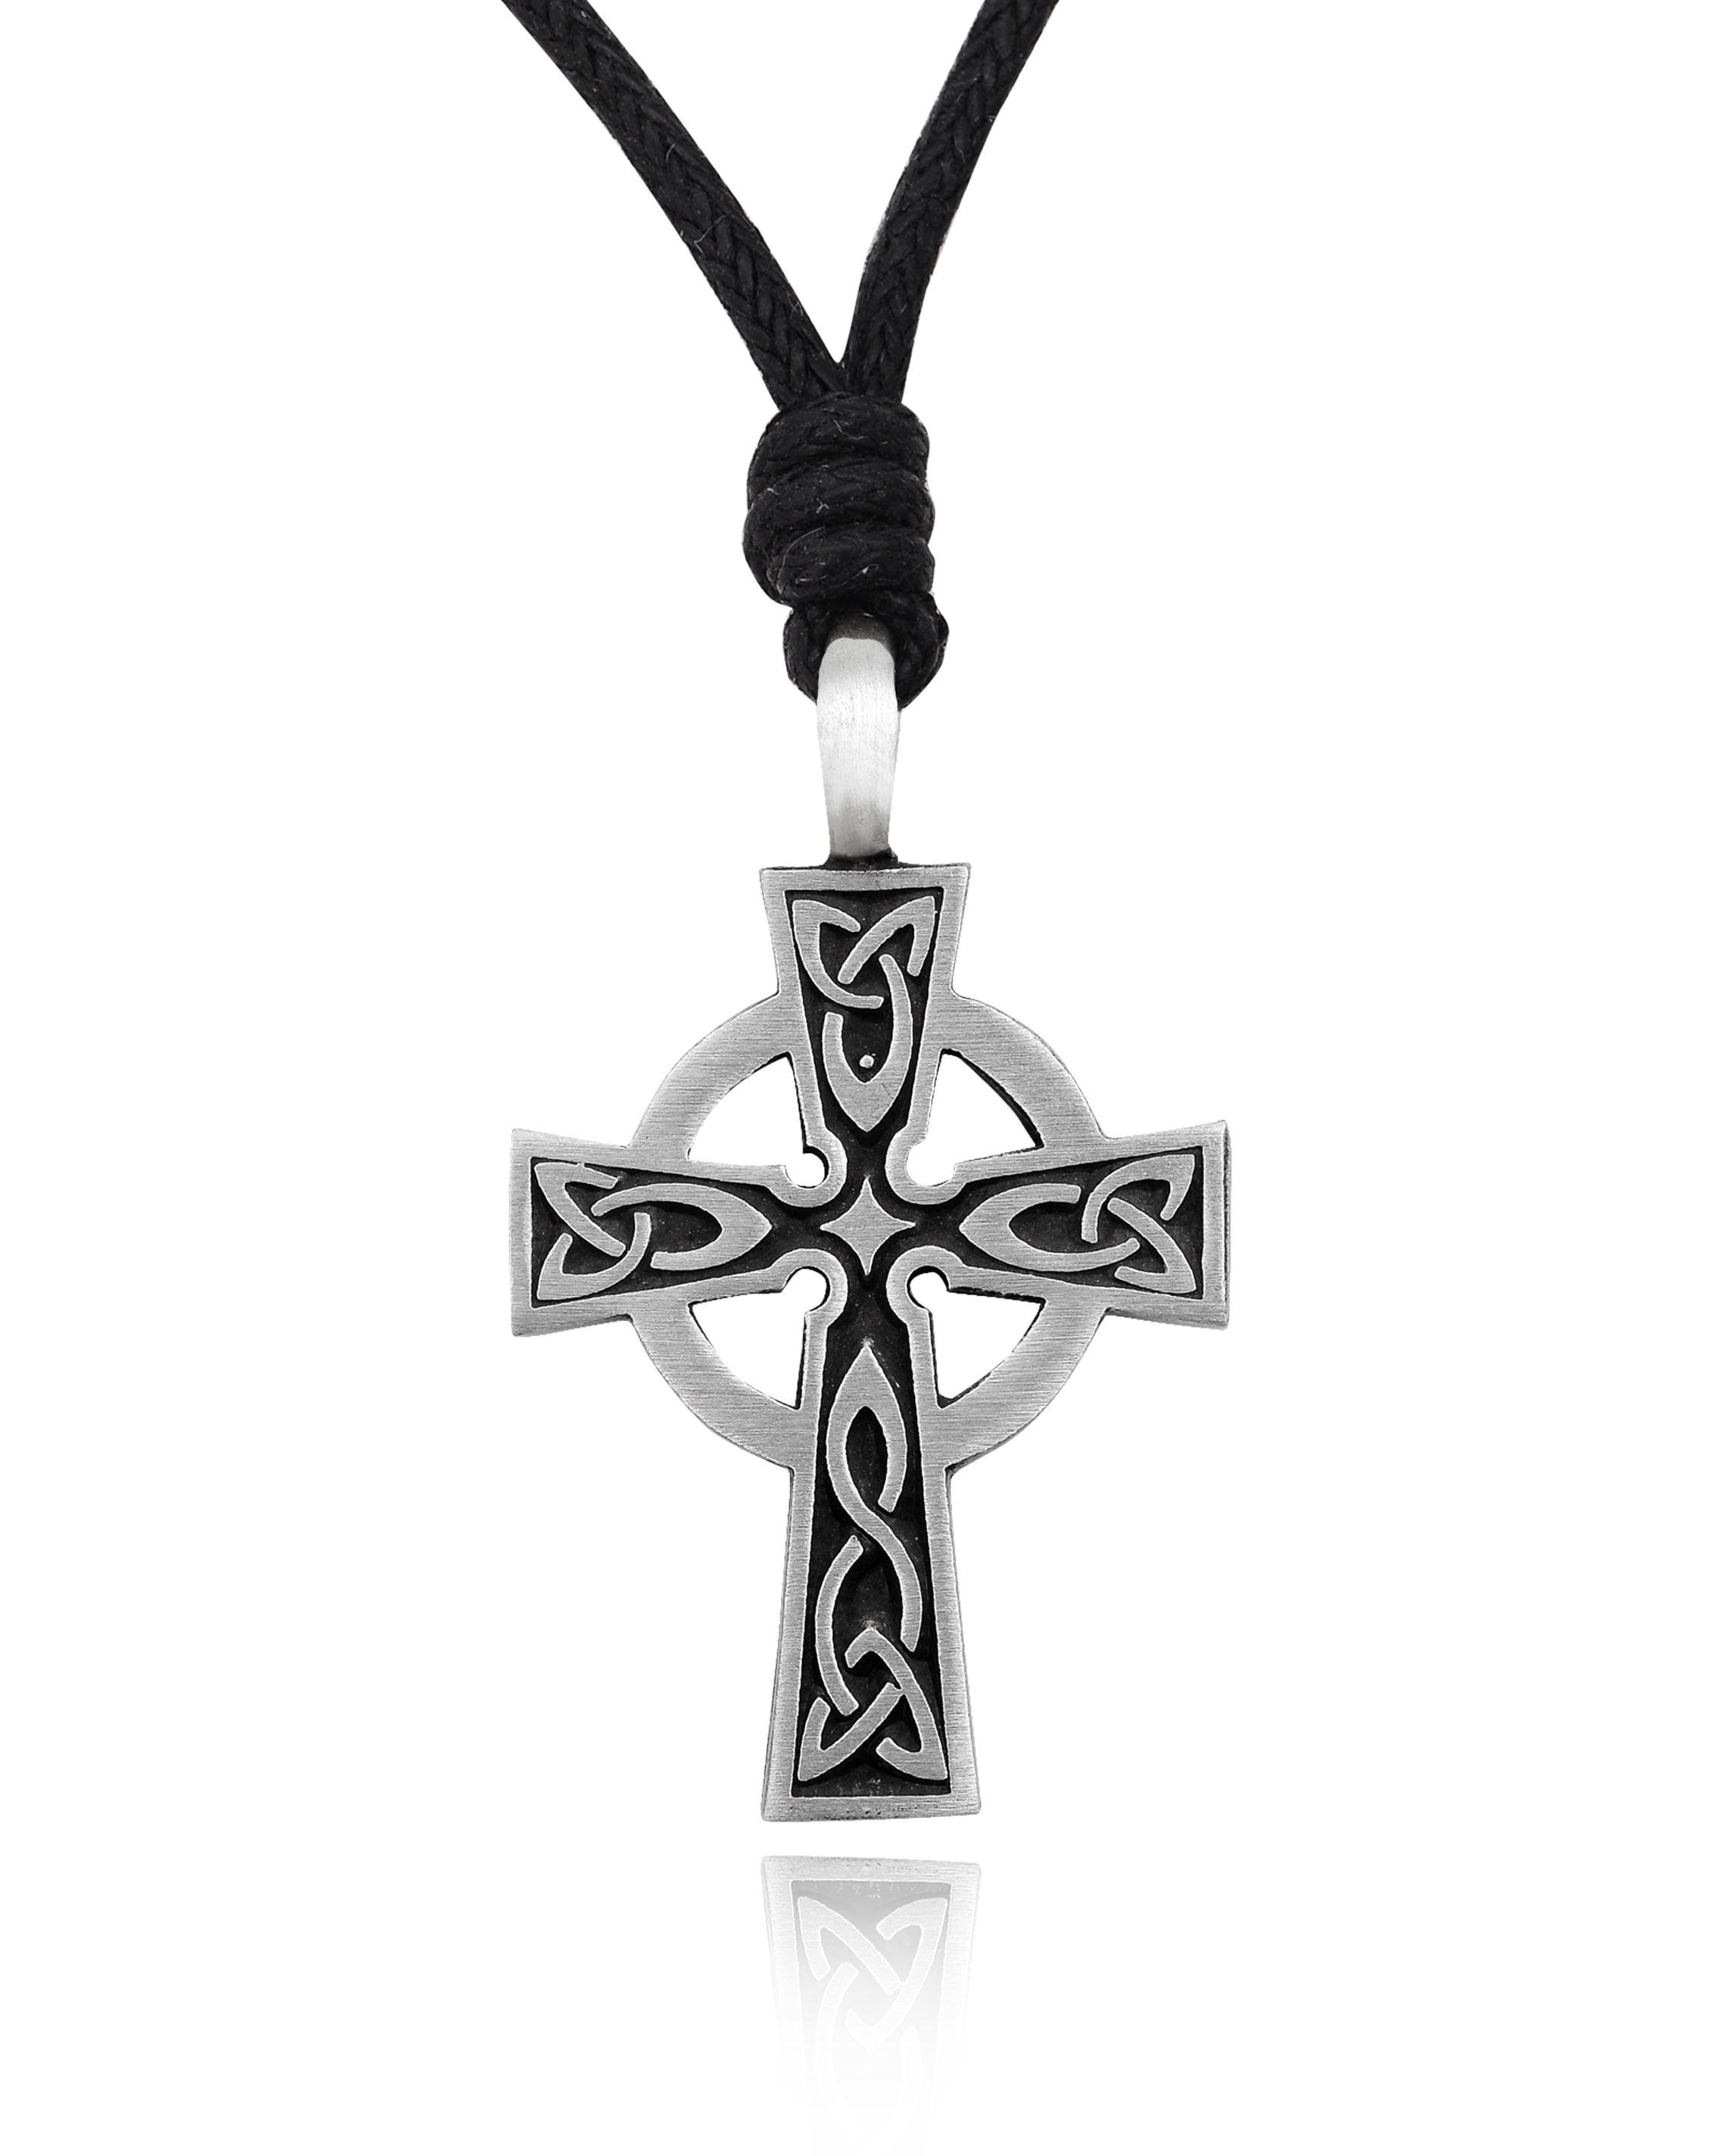 GOTHIC CROSS Silver Pewter Christmas ORNAMENT Holiday